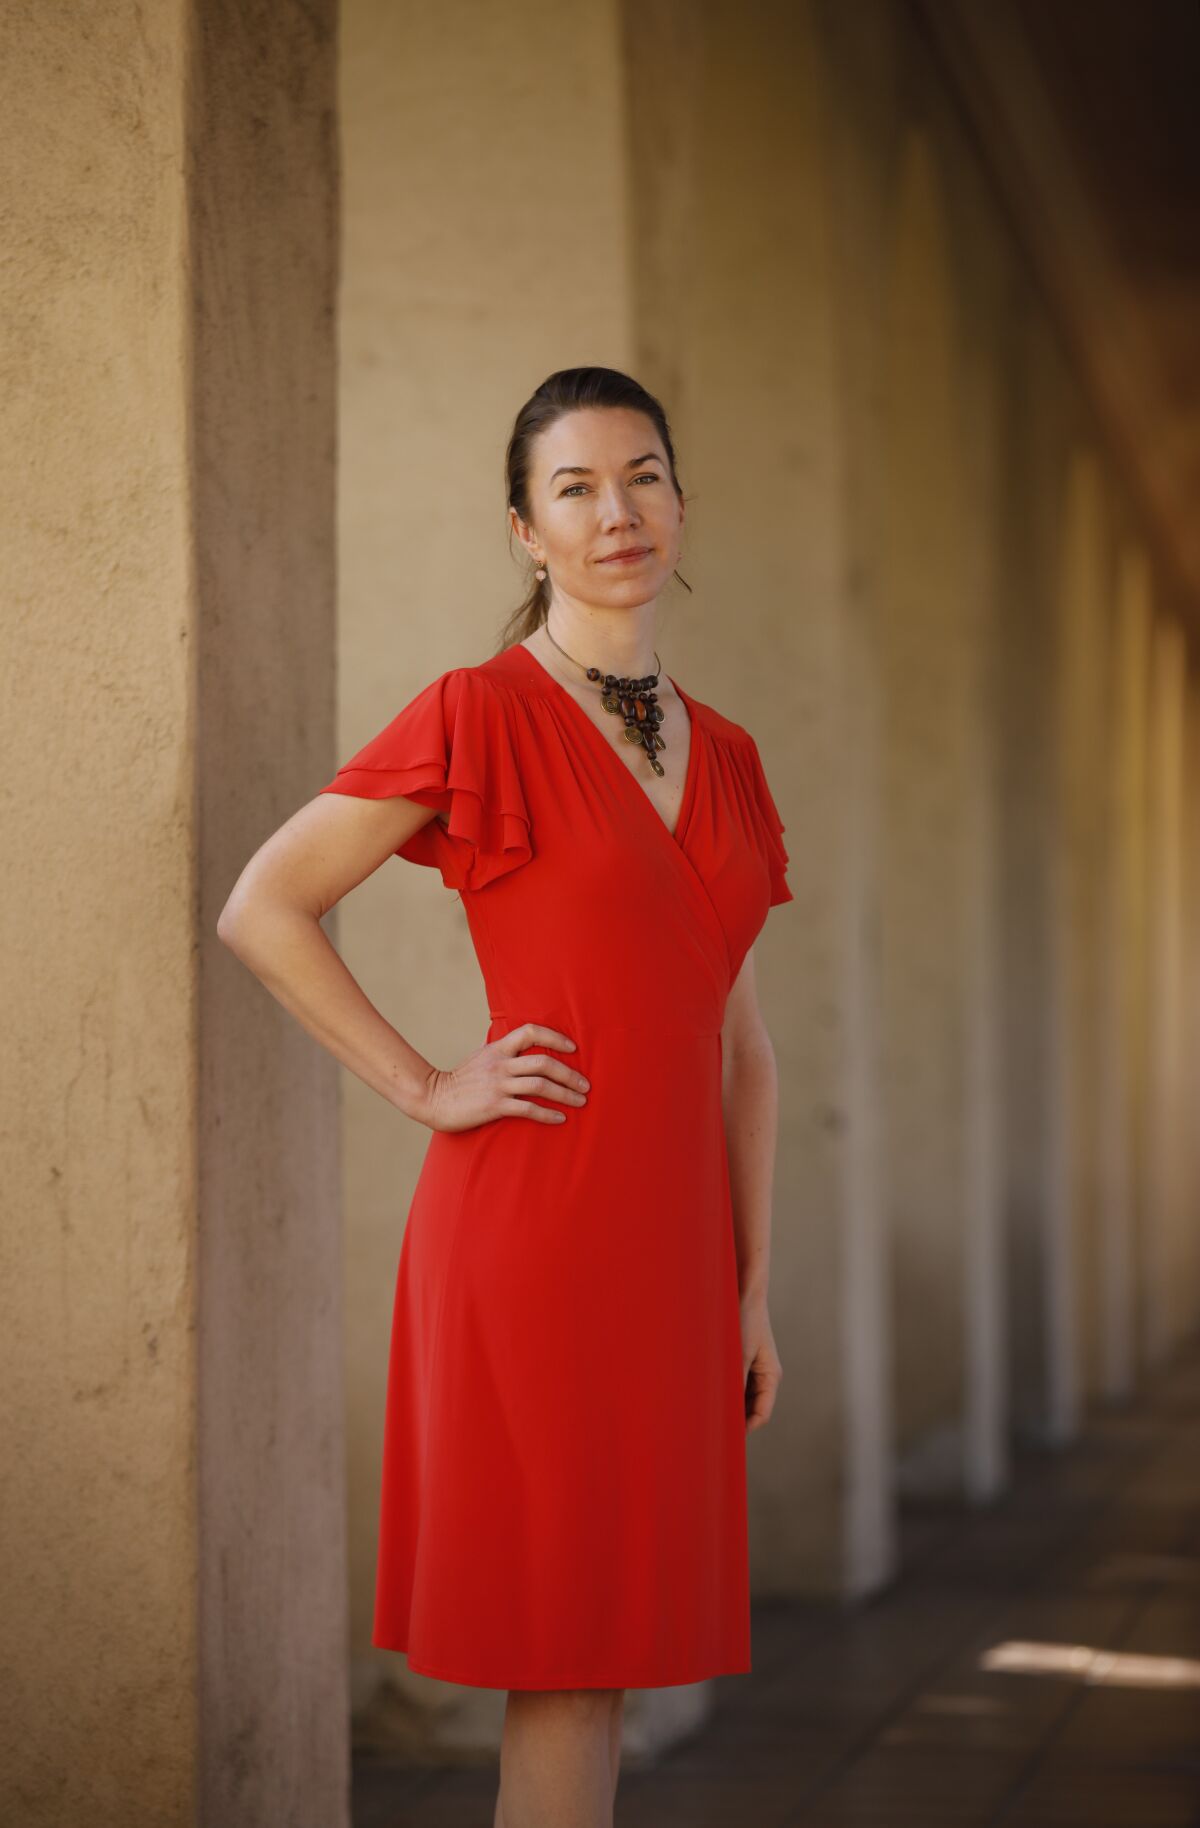 Chi Essary is a curator and artist, shown here at Balboa Park on Feb. 11, 2020. Her latest exhibition called Illumination is at the San Diego Art Institute.